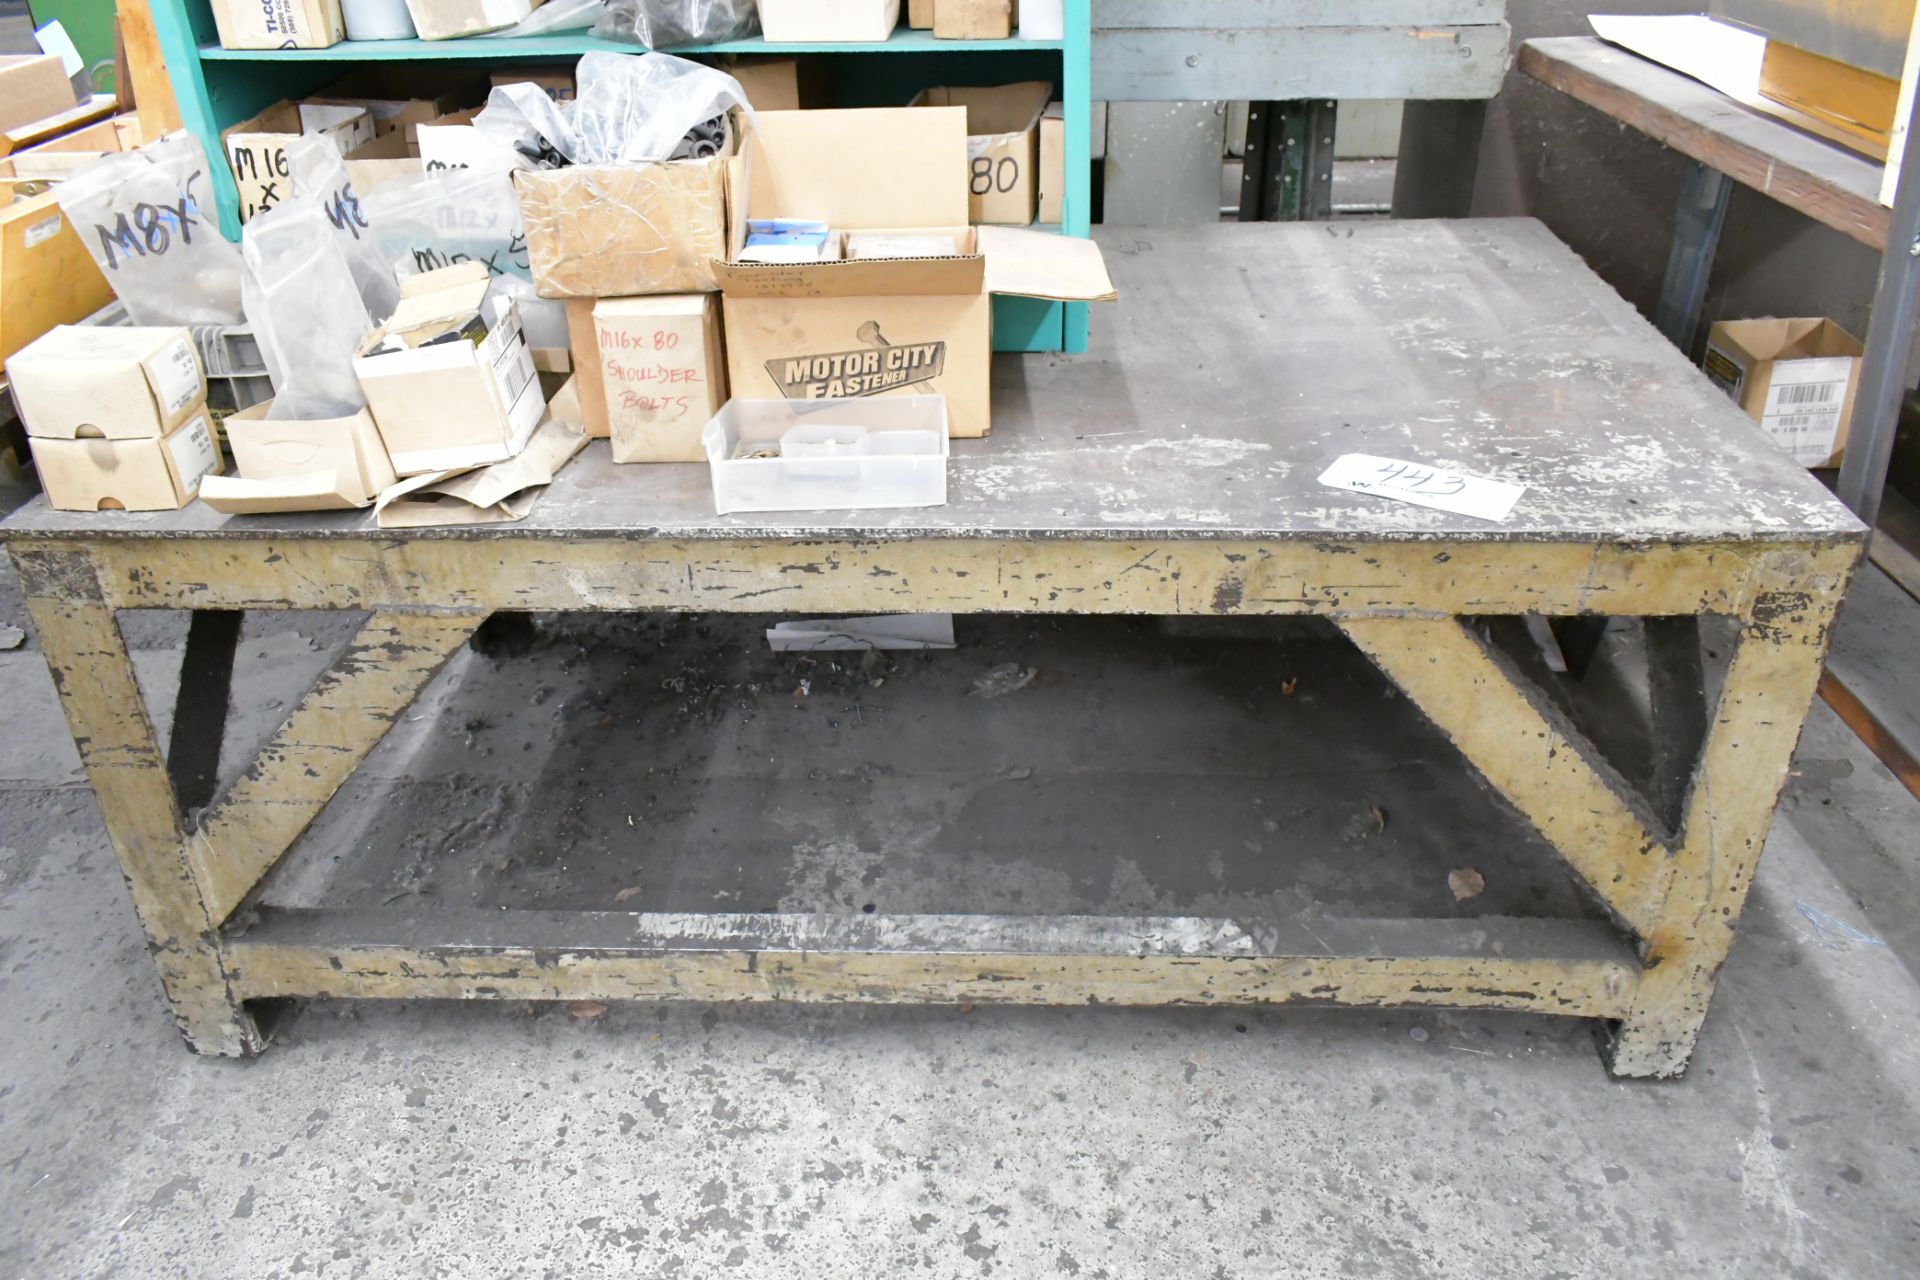 Lot-(1) 36" x 60" x 3/8" Steel Layout Table, and (1) 36" x 86" x 1" Steel Layout Table